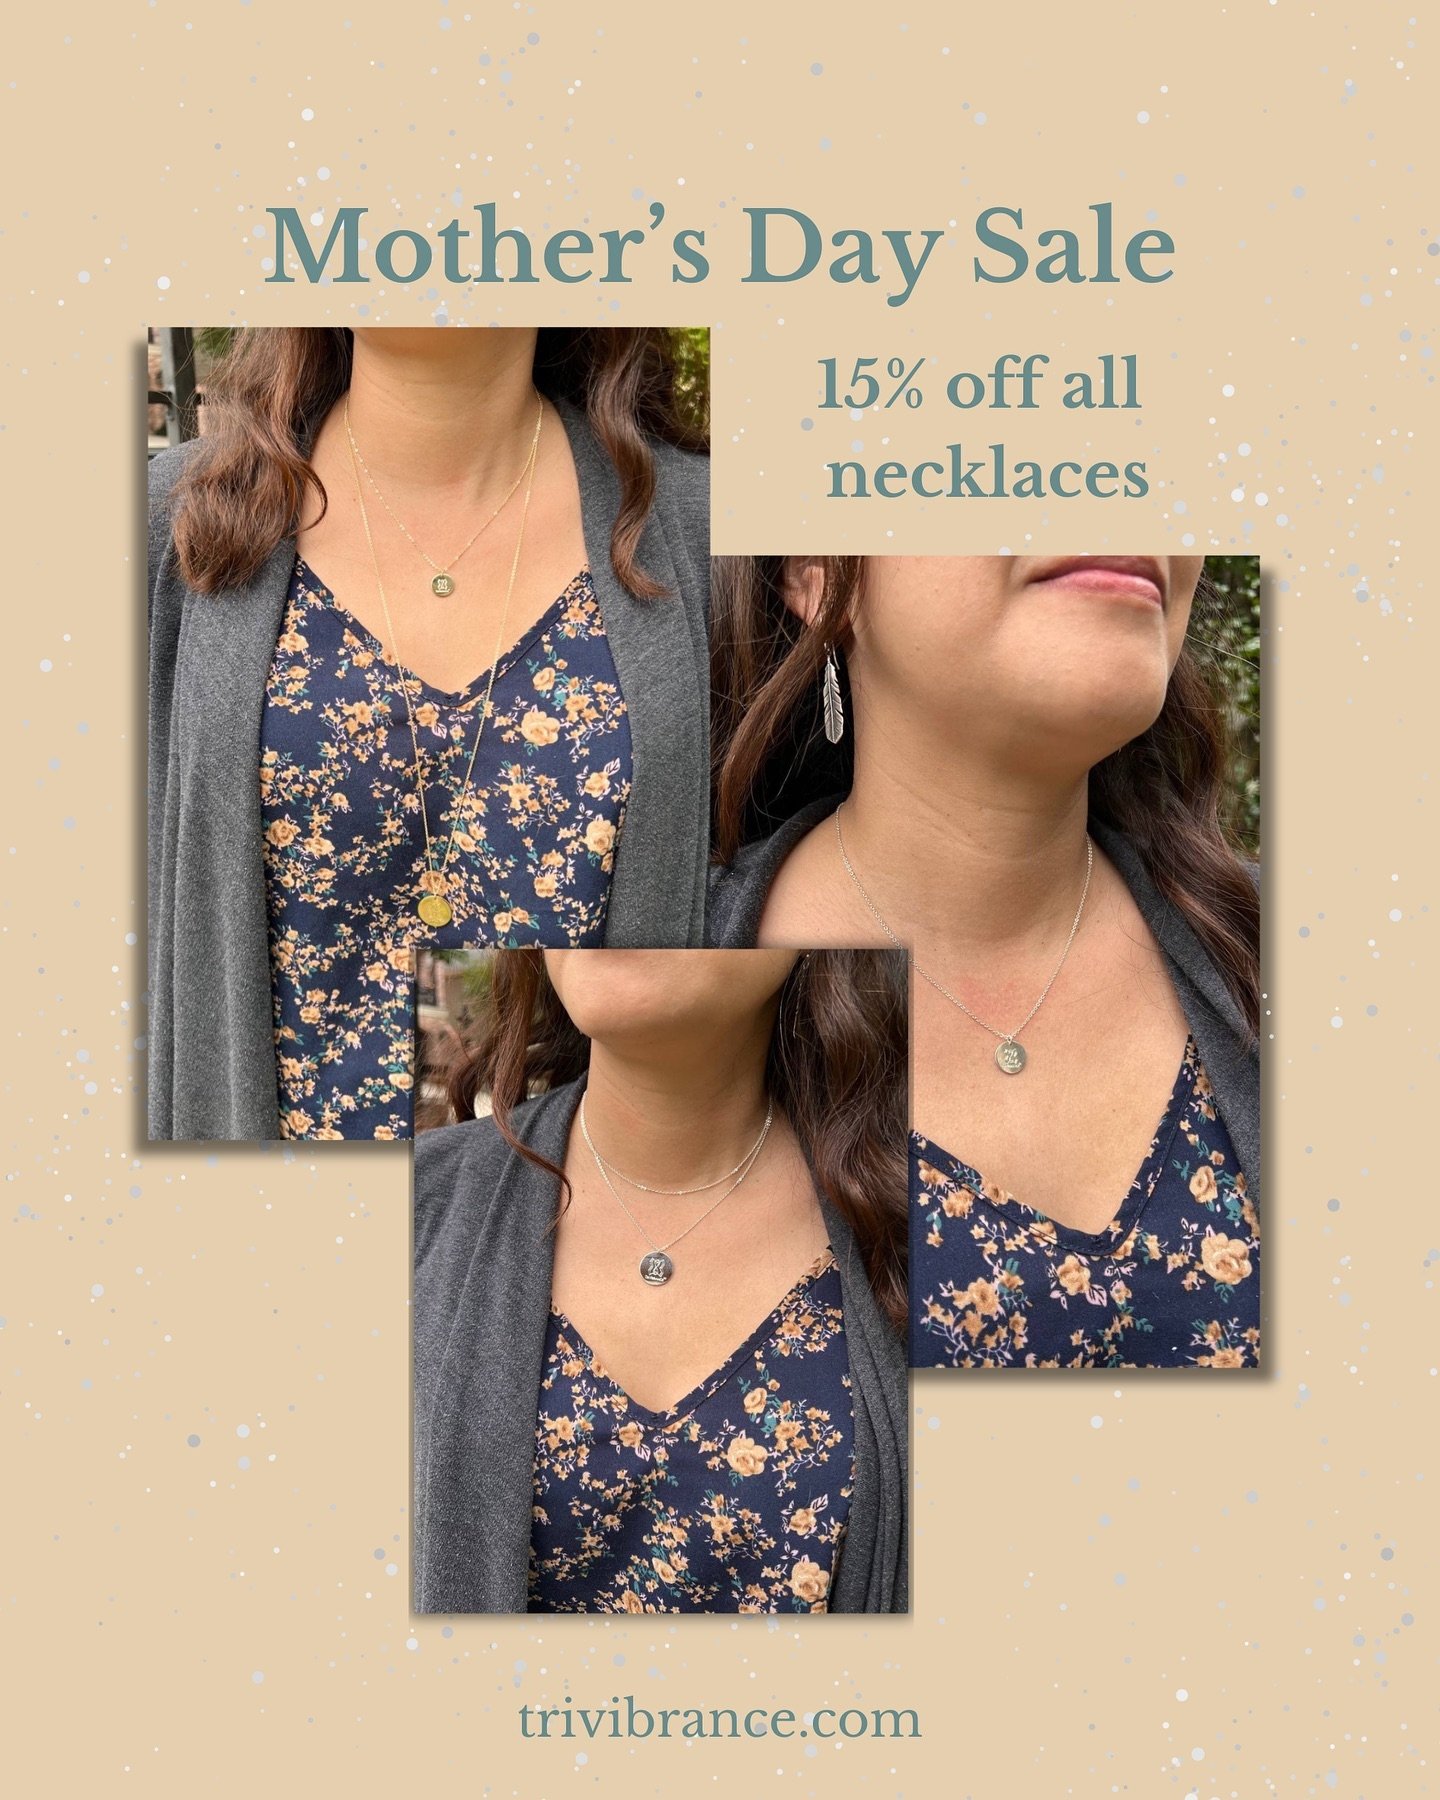 A Matching Mother&rsquo;s Day Gift that will last 🤩💖

Our one-of-a-kind TriVibrance&trade; Protective Pendant Necklace gently harmonizes and transforms detrimental low vibration energies (electromagnetic frequencies or radiation, negative individua